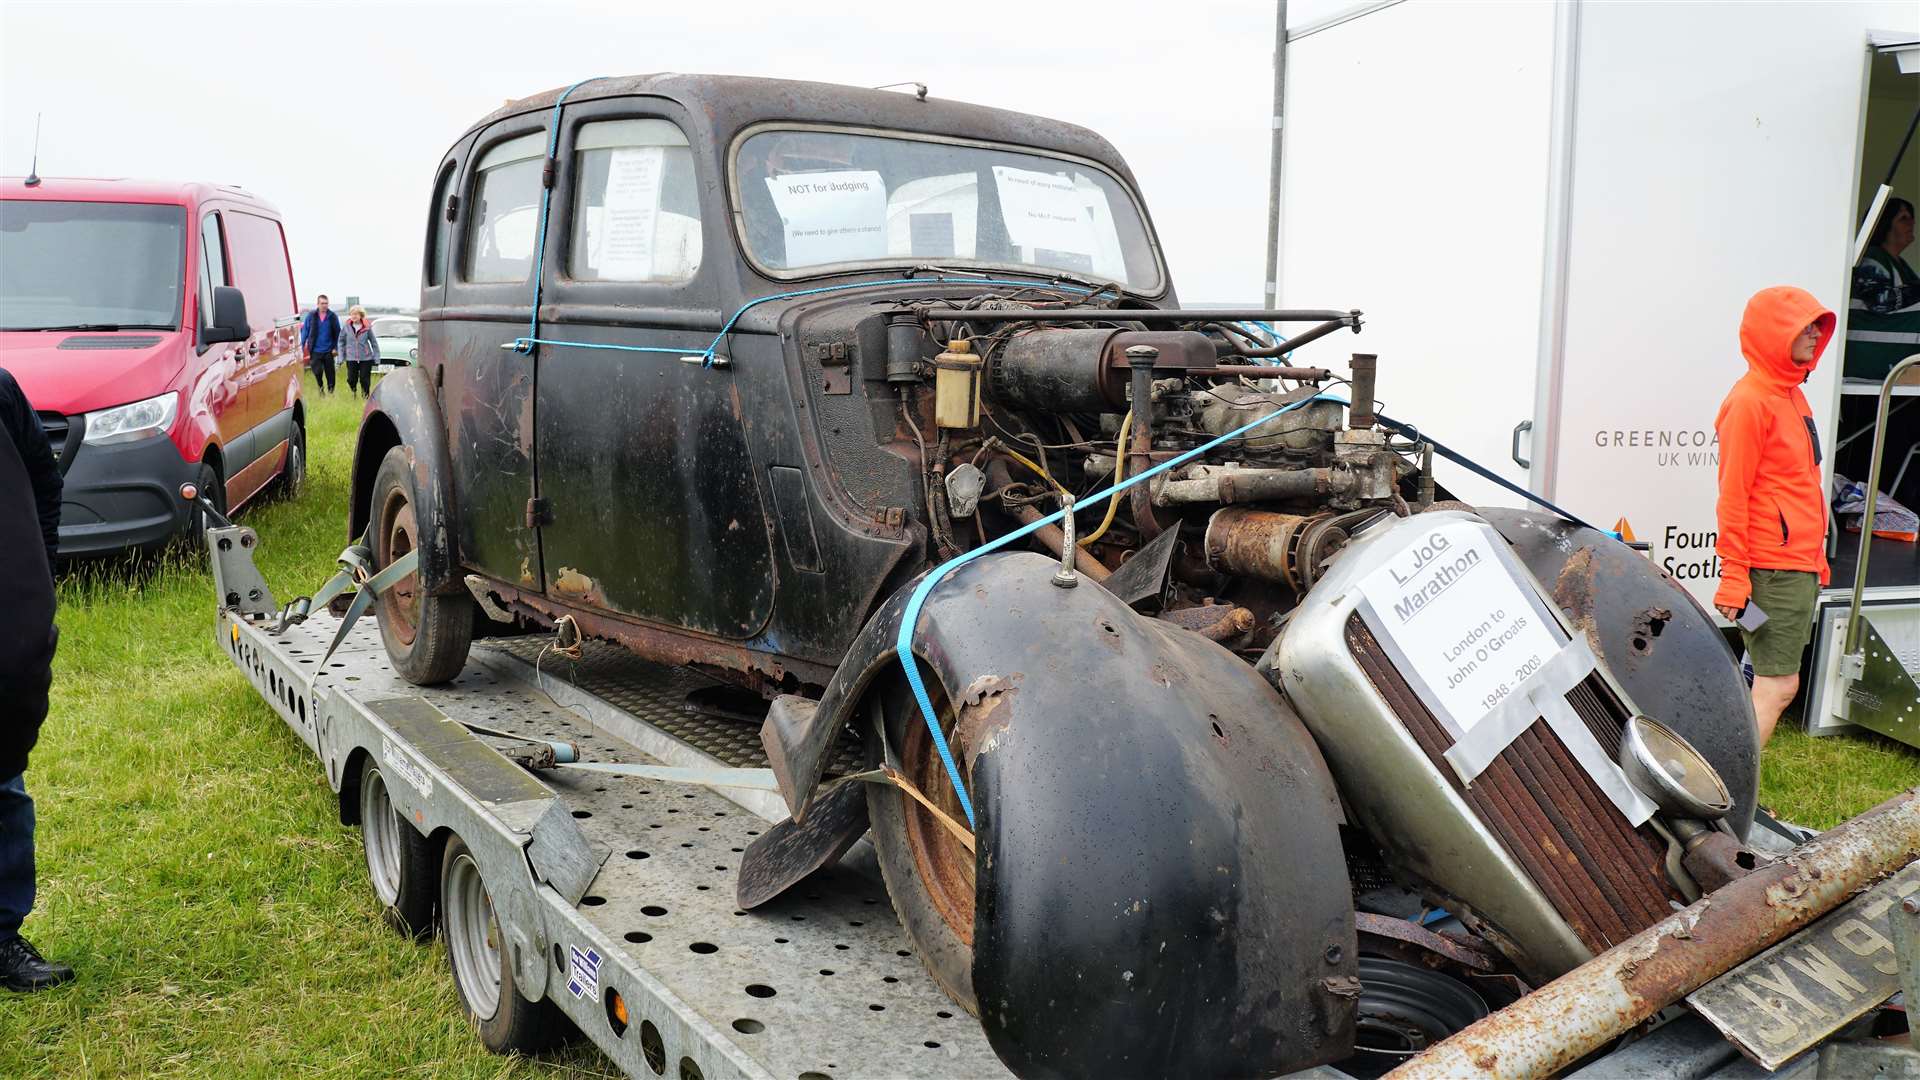 Tom Sayles' 1948/9 Rover P2 or P3 that he recently obtained. The car originates from London but the DVLA records have gone missing he says. 'It's been on a marathon run from London to John O'Groats starting in 1948 and ending in 2023. It's taken over 70 years to get here,' joked Tom. Picture: DGS